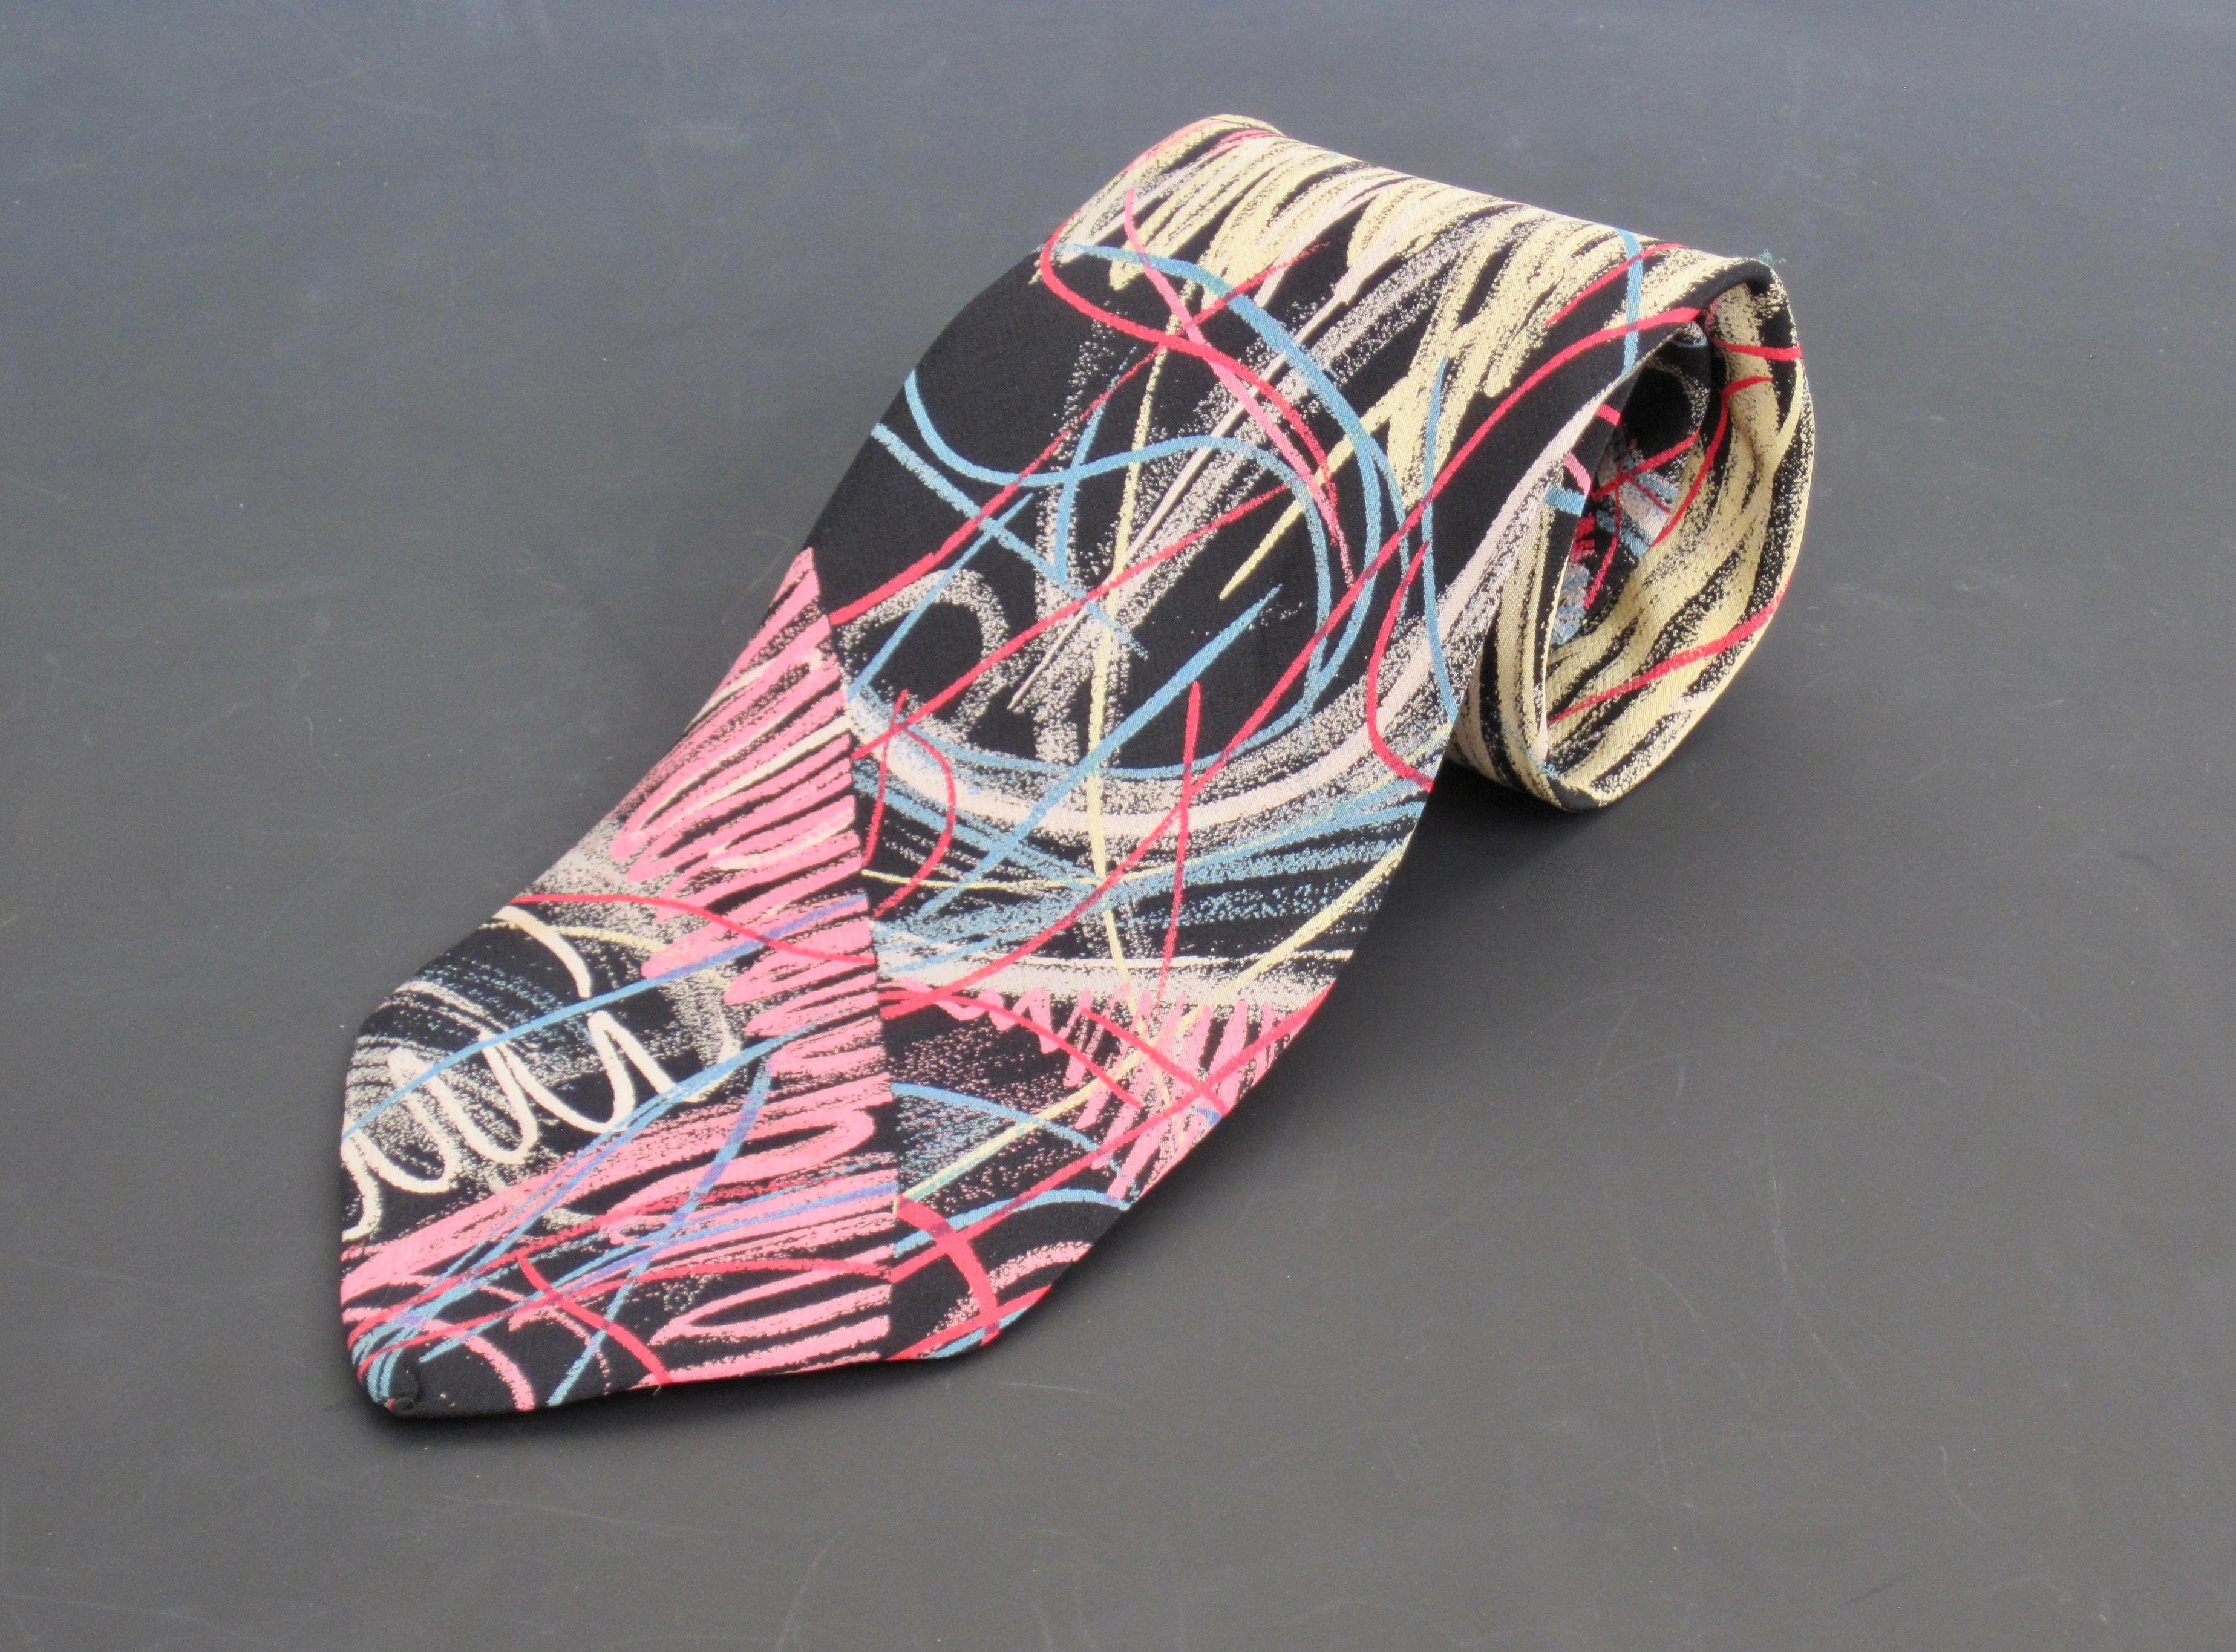 An Italian silk necktie with a colorful scribble-like design by Massimo Iosa Ghini, circa 1985. The blue and red line design over top a yellow, pink, and gray scribble print and black background create a fun, energetic, artful feel. 
This item has